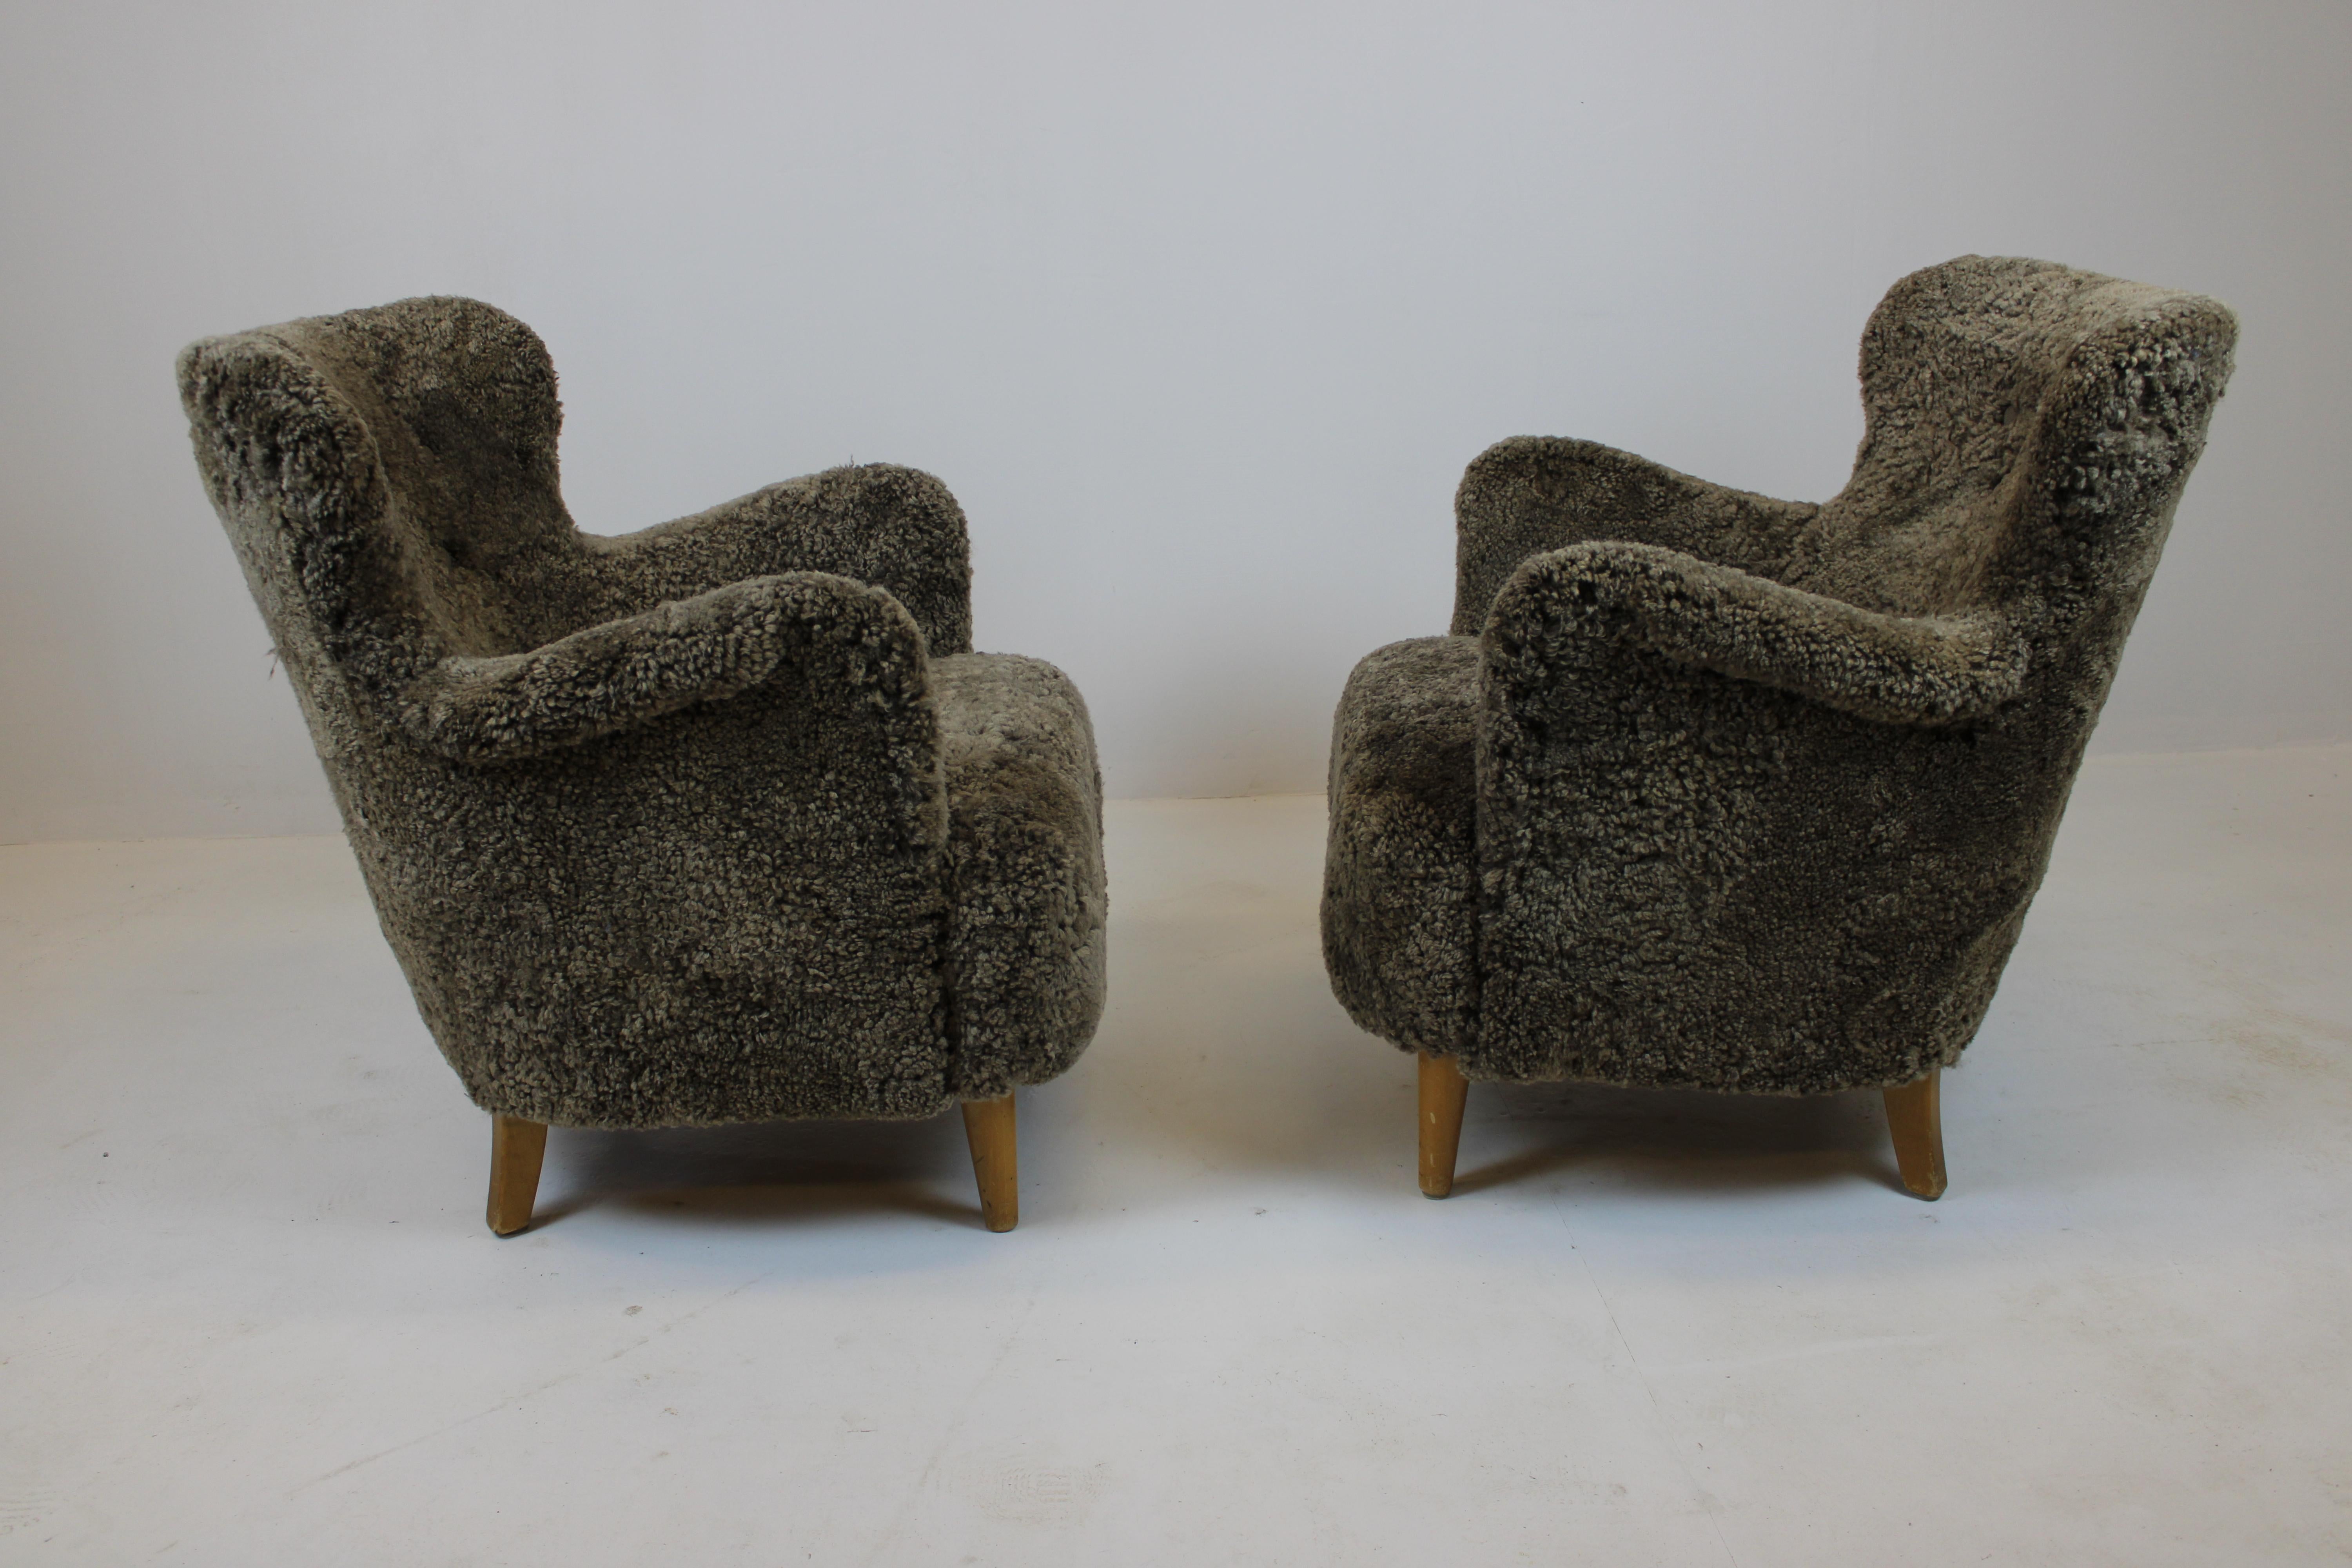 Amazing Swedish mid-century design armchairs.
Upholstered in highest quality sheepskin from New Zealand. 

“Sahara”-coloured sheepskin, which in real life appearance strikes to be a bit more brown than a camera can show.

Newly renovated and ready